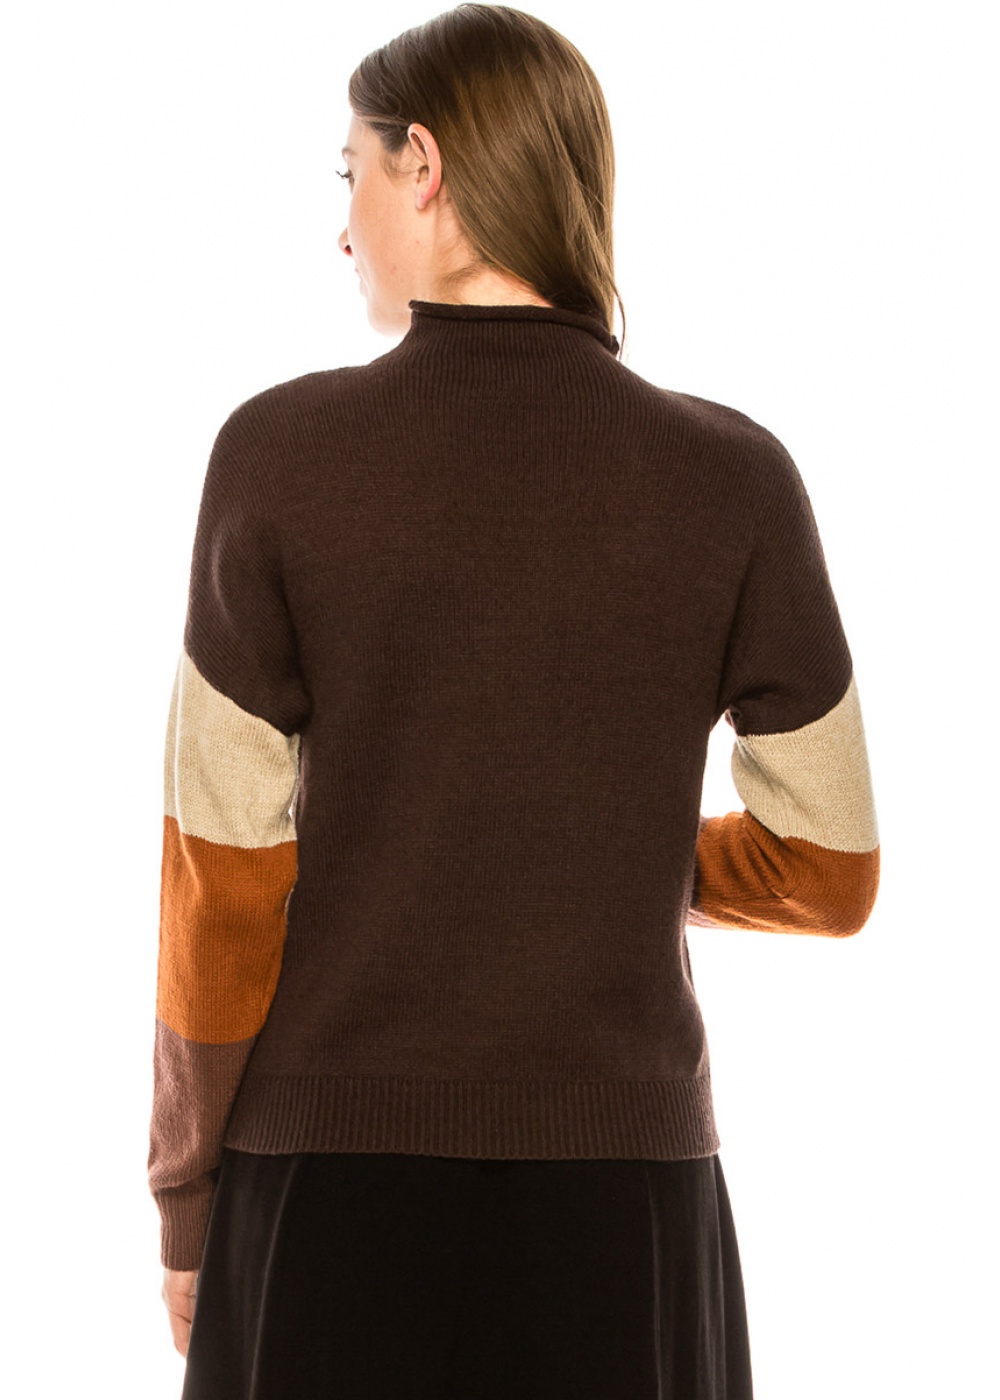 High neck color block sweater in brown